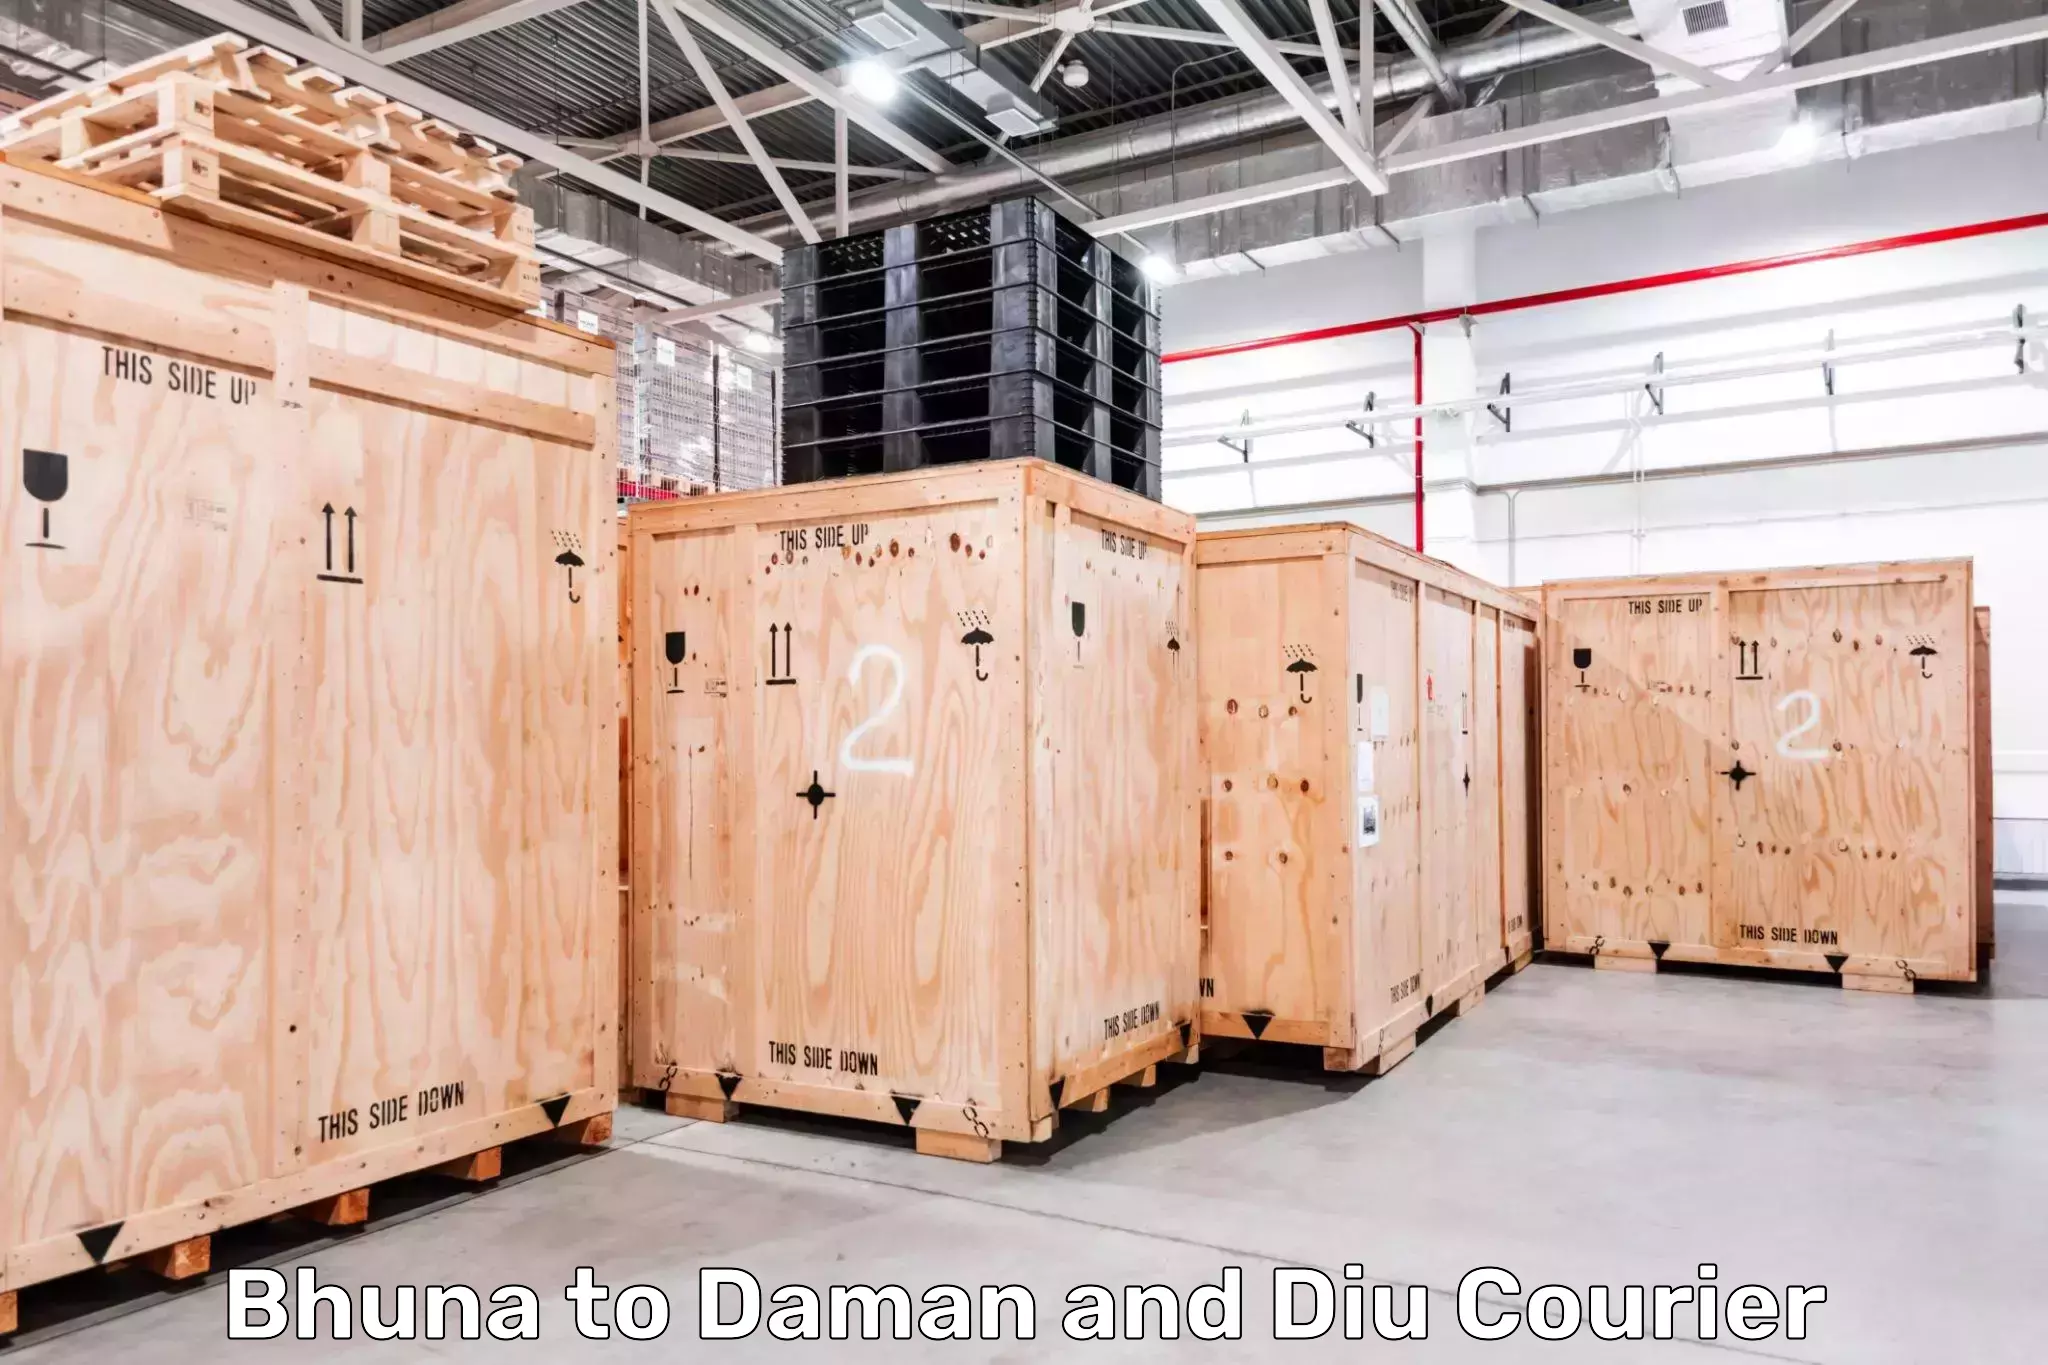 User-friendly courier app Bhuna to Daman and Diu